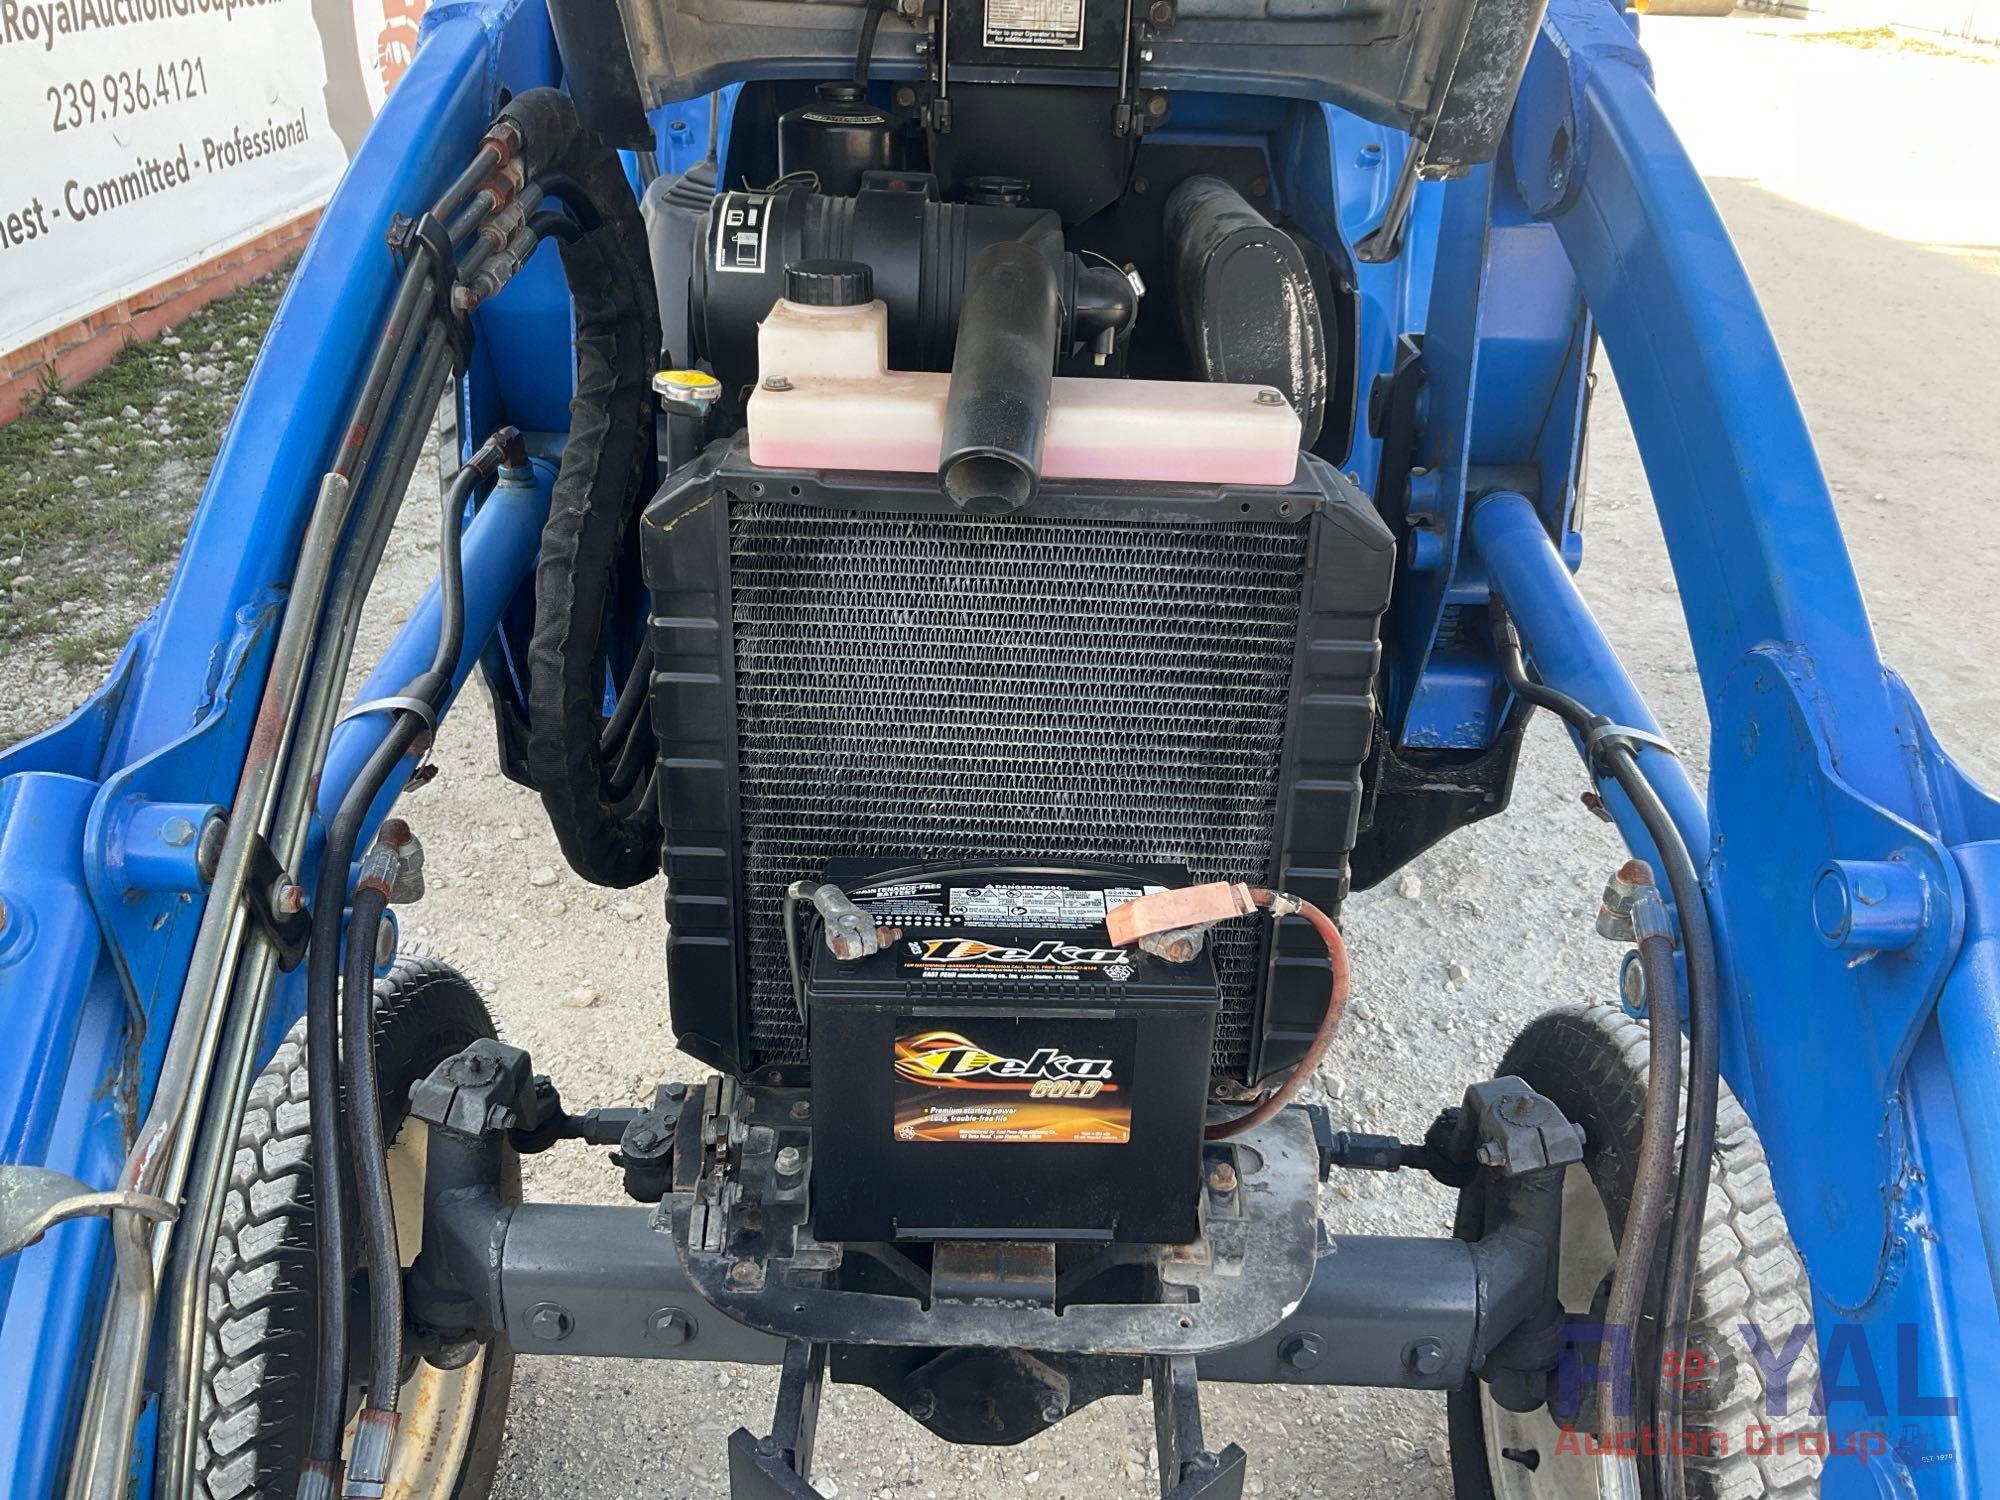 2003 New Holland TC40 Loader Tractor